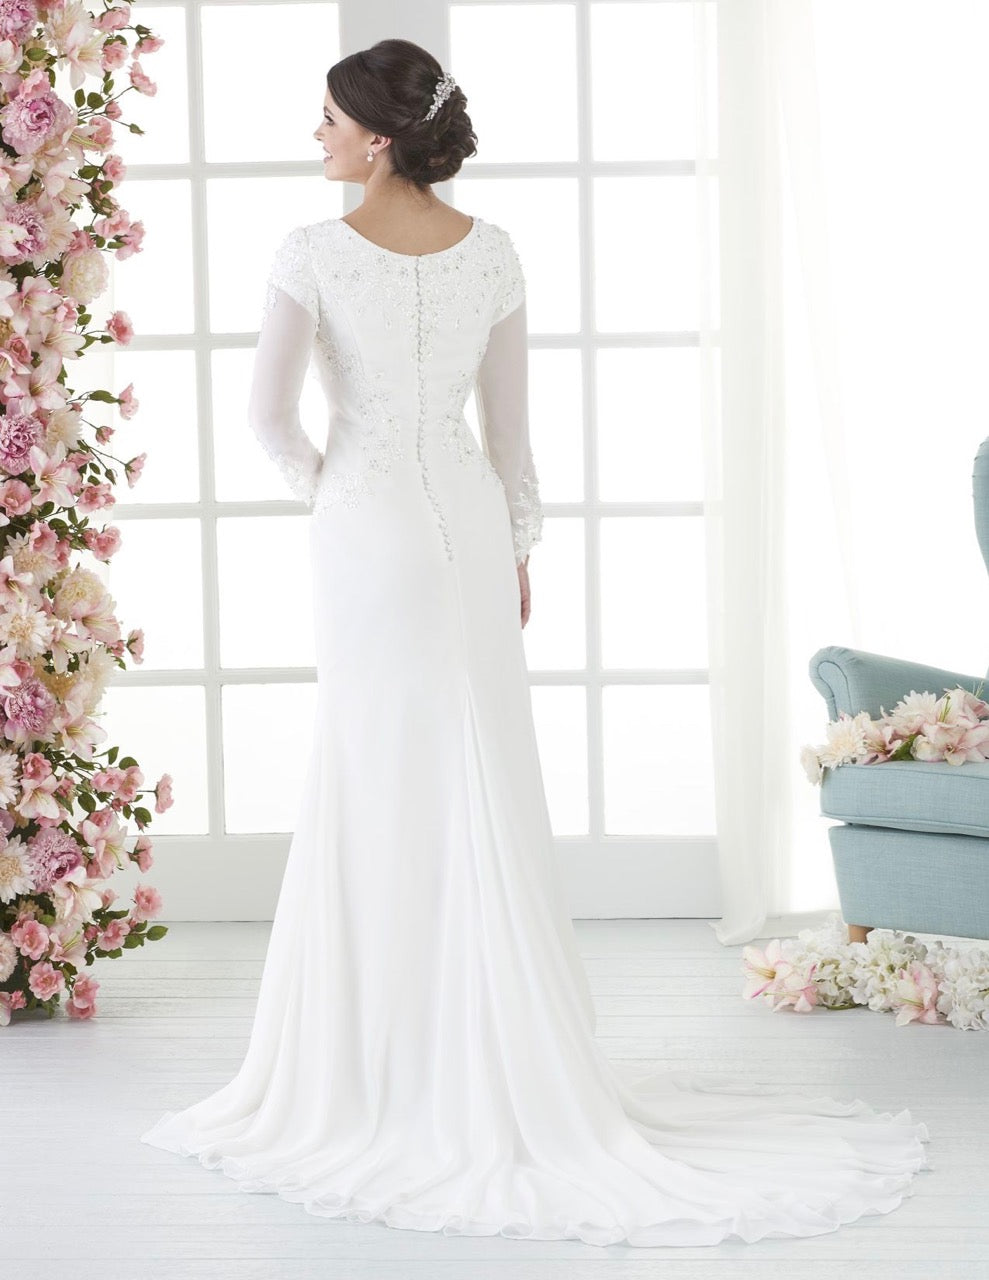 Bonny Bridal 2802 Modest Wedding Dress Bliss Collection Back view from A Closet Full of Dresses